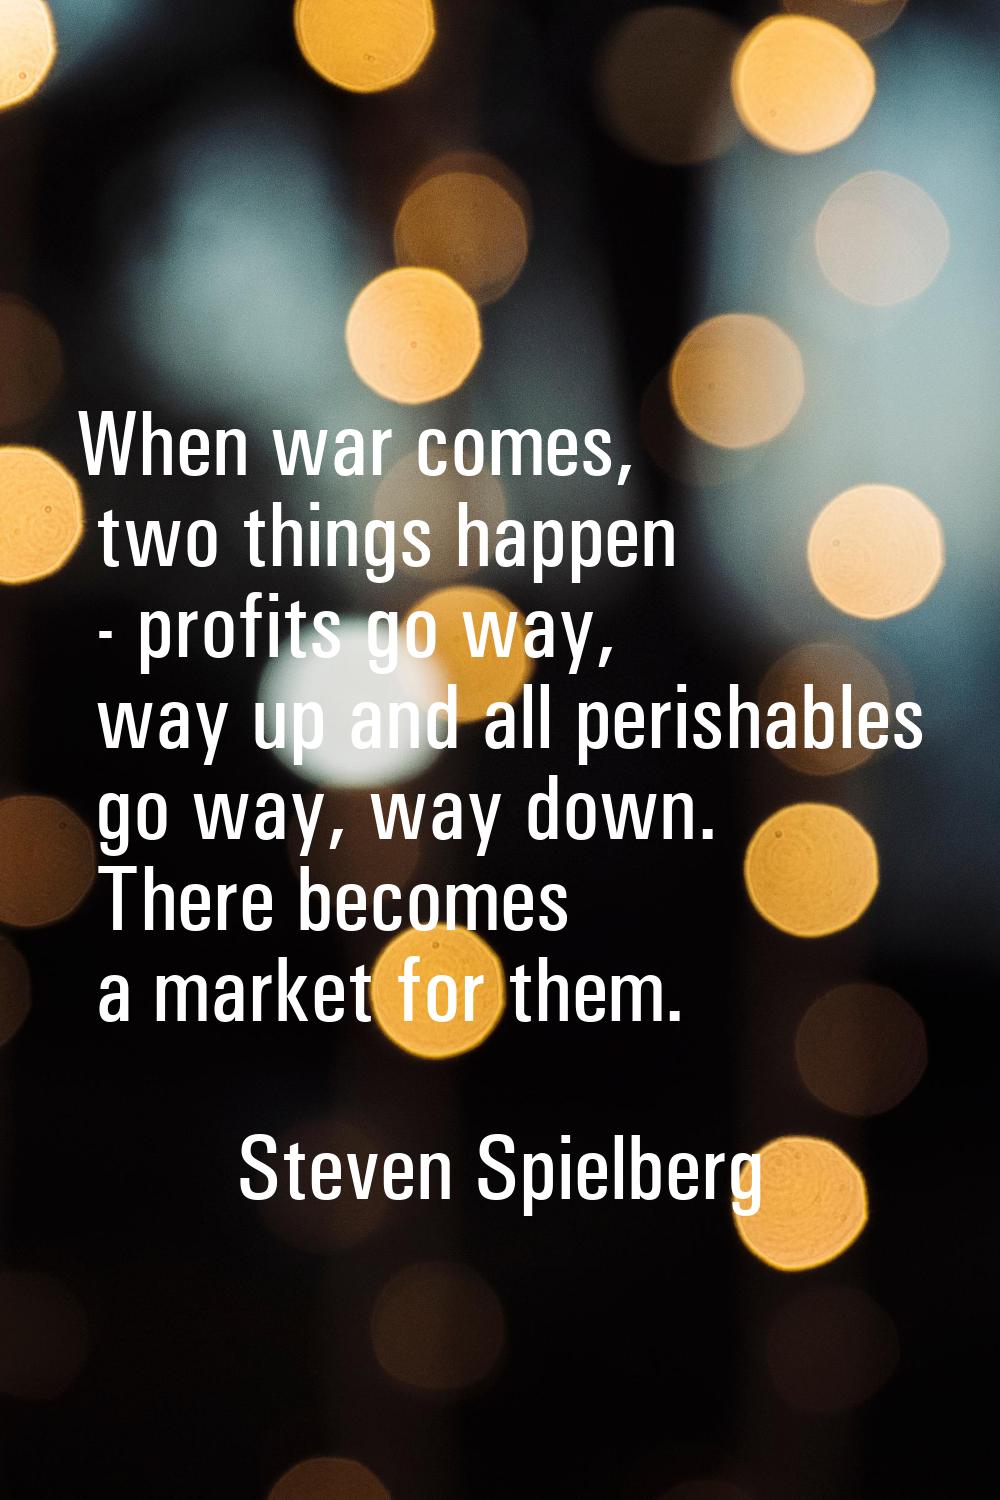 When war comes, two things happen - profits go way, way up and all perishables go way, way down. Th